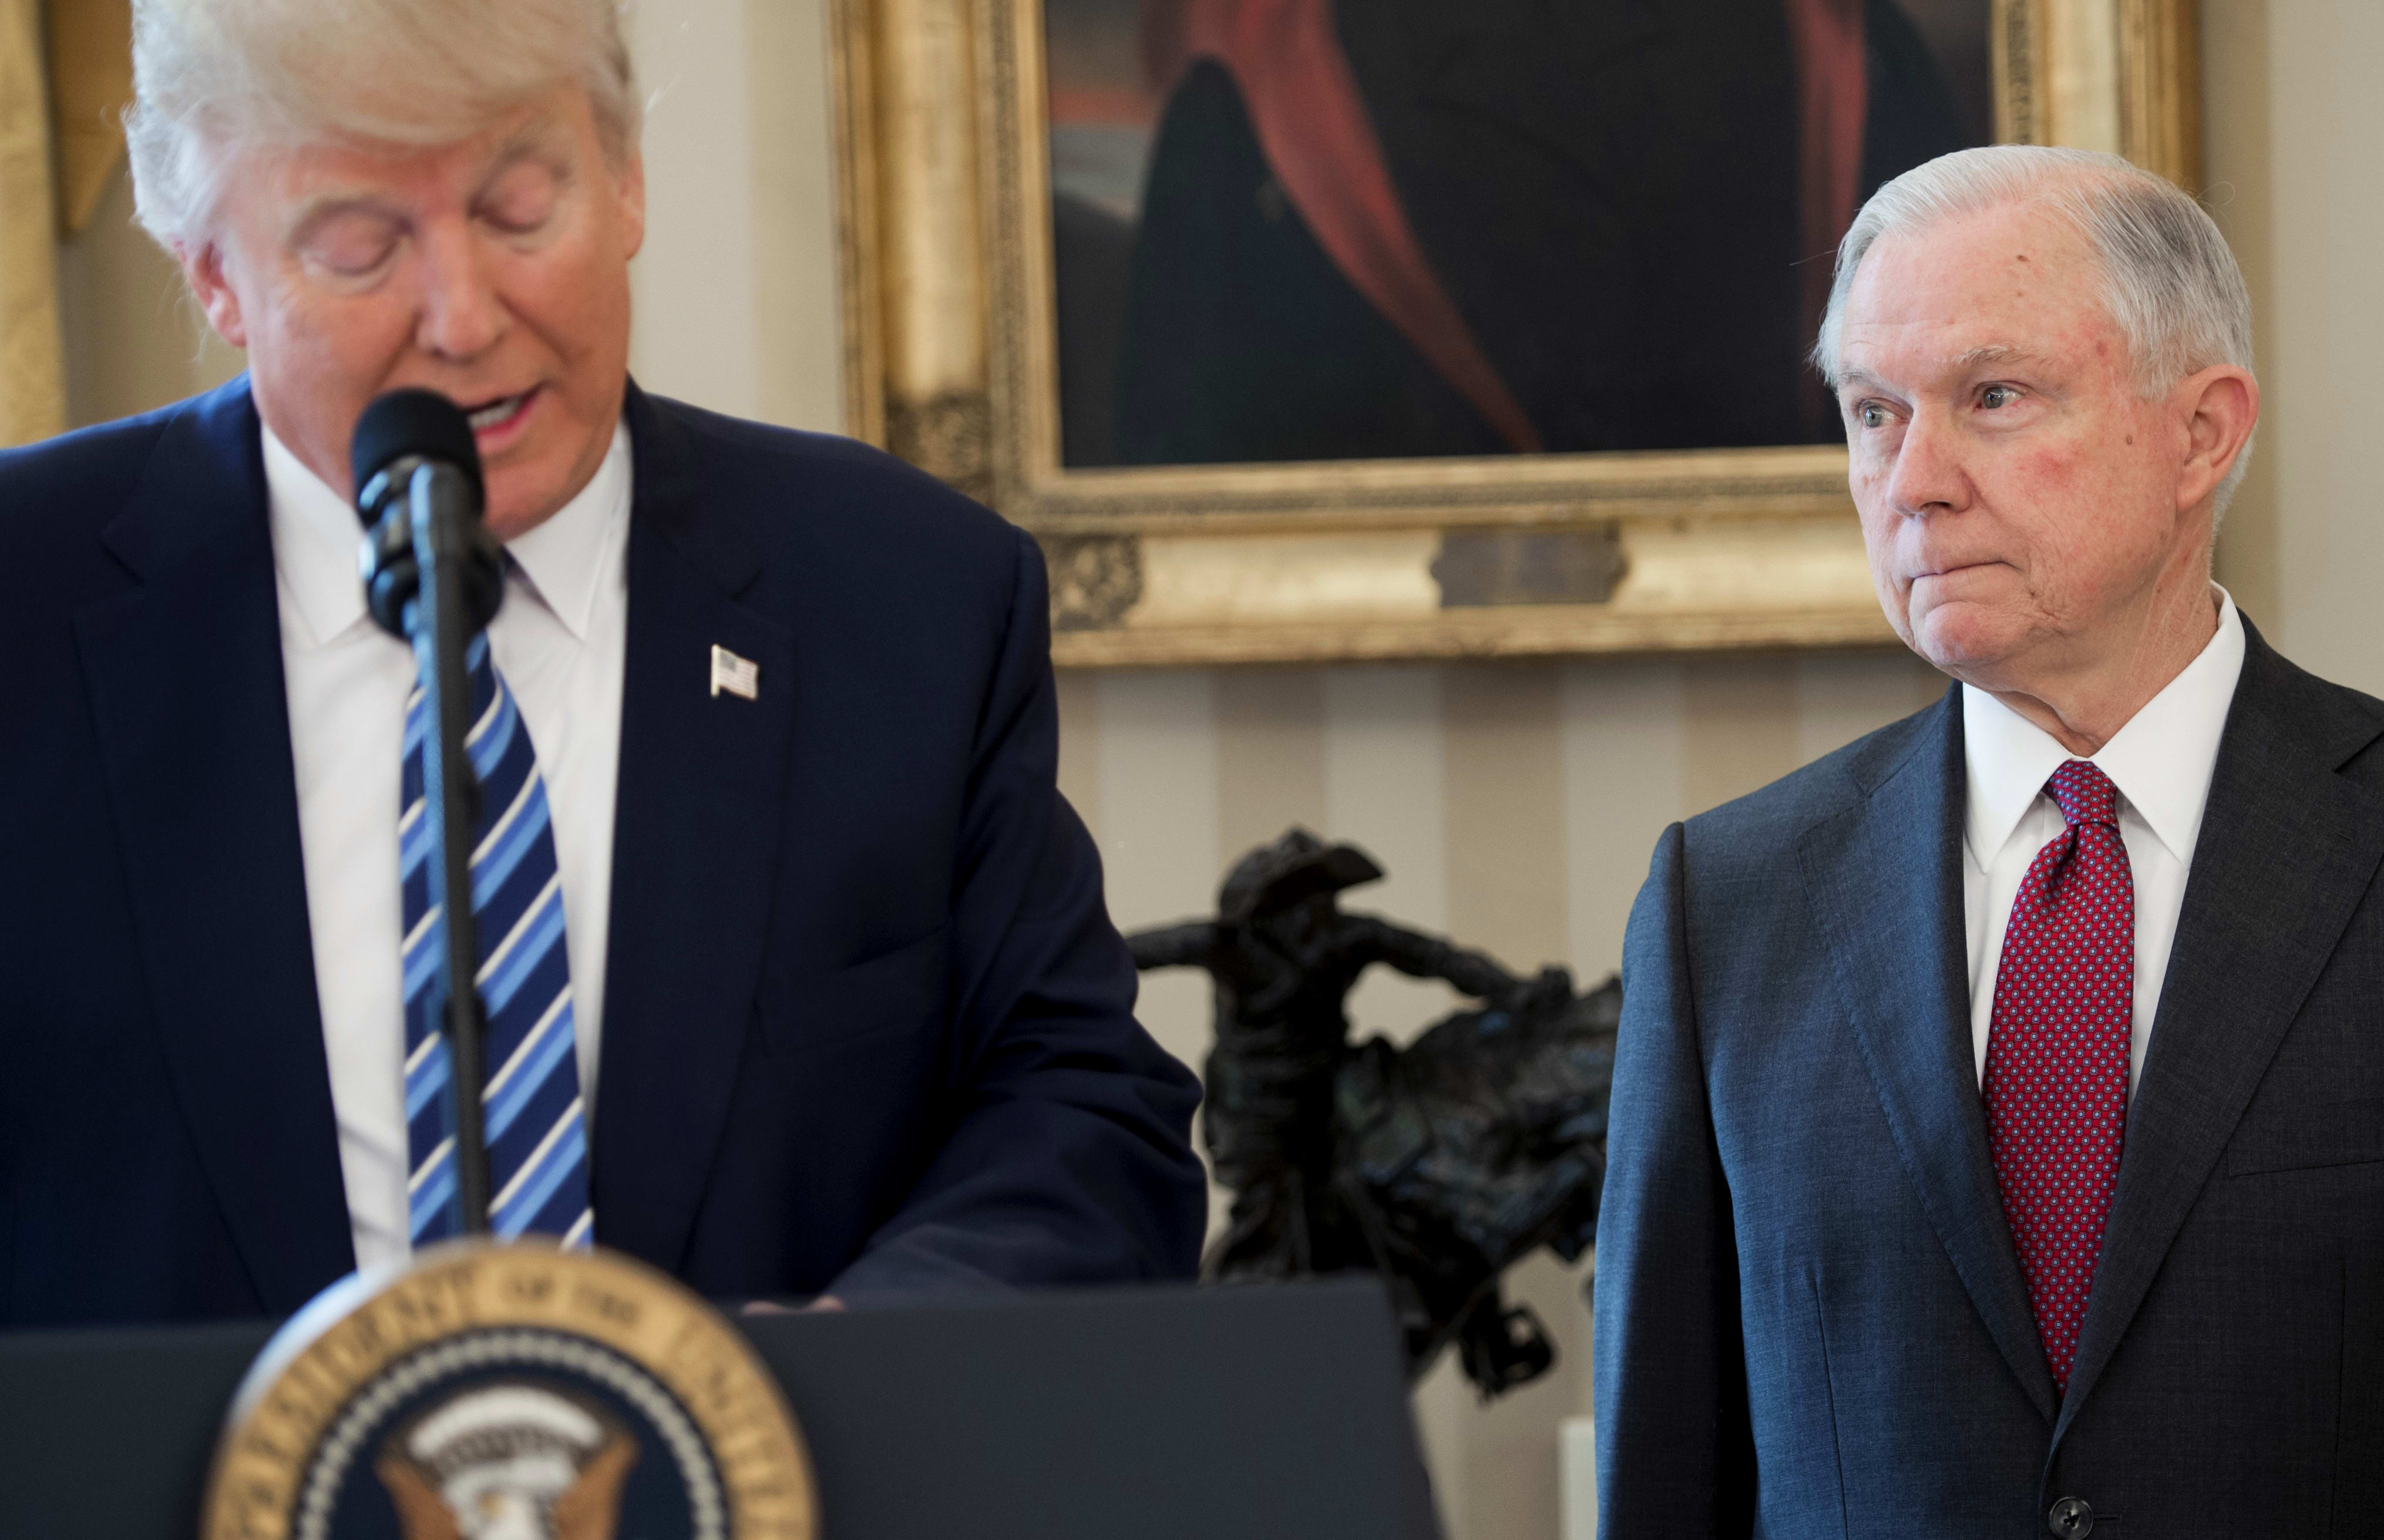 US President Donald Trump alongside US Attorney General Jeff Sessions after Sessions was sworn in as Attorney General in the Oval Office of the White House in Washington, February 9, 2017